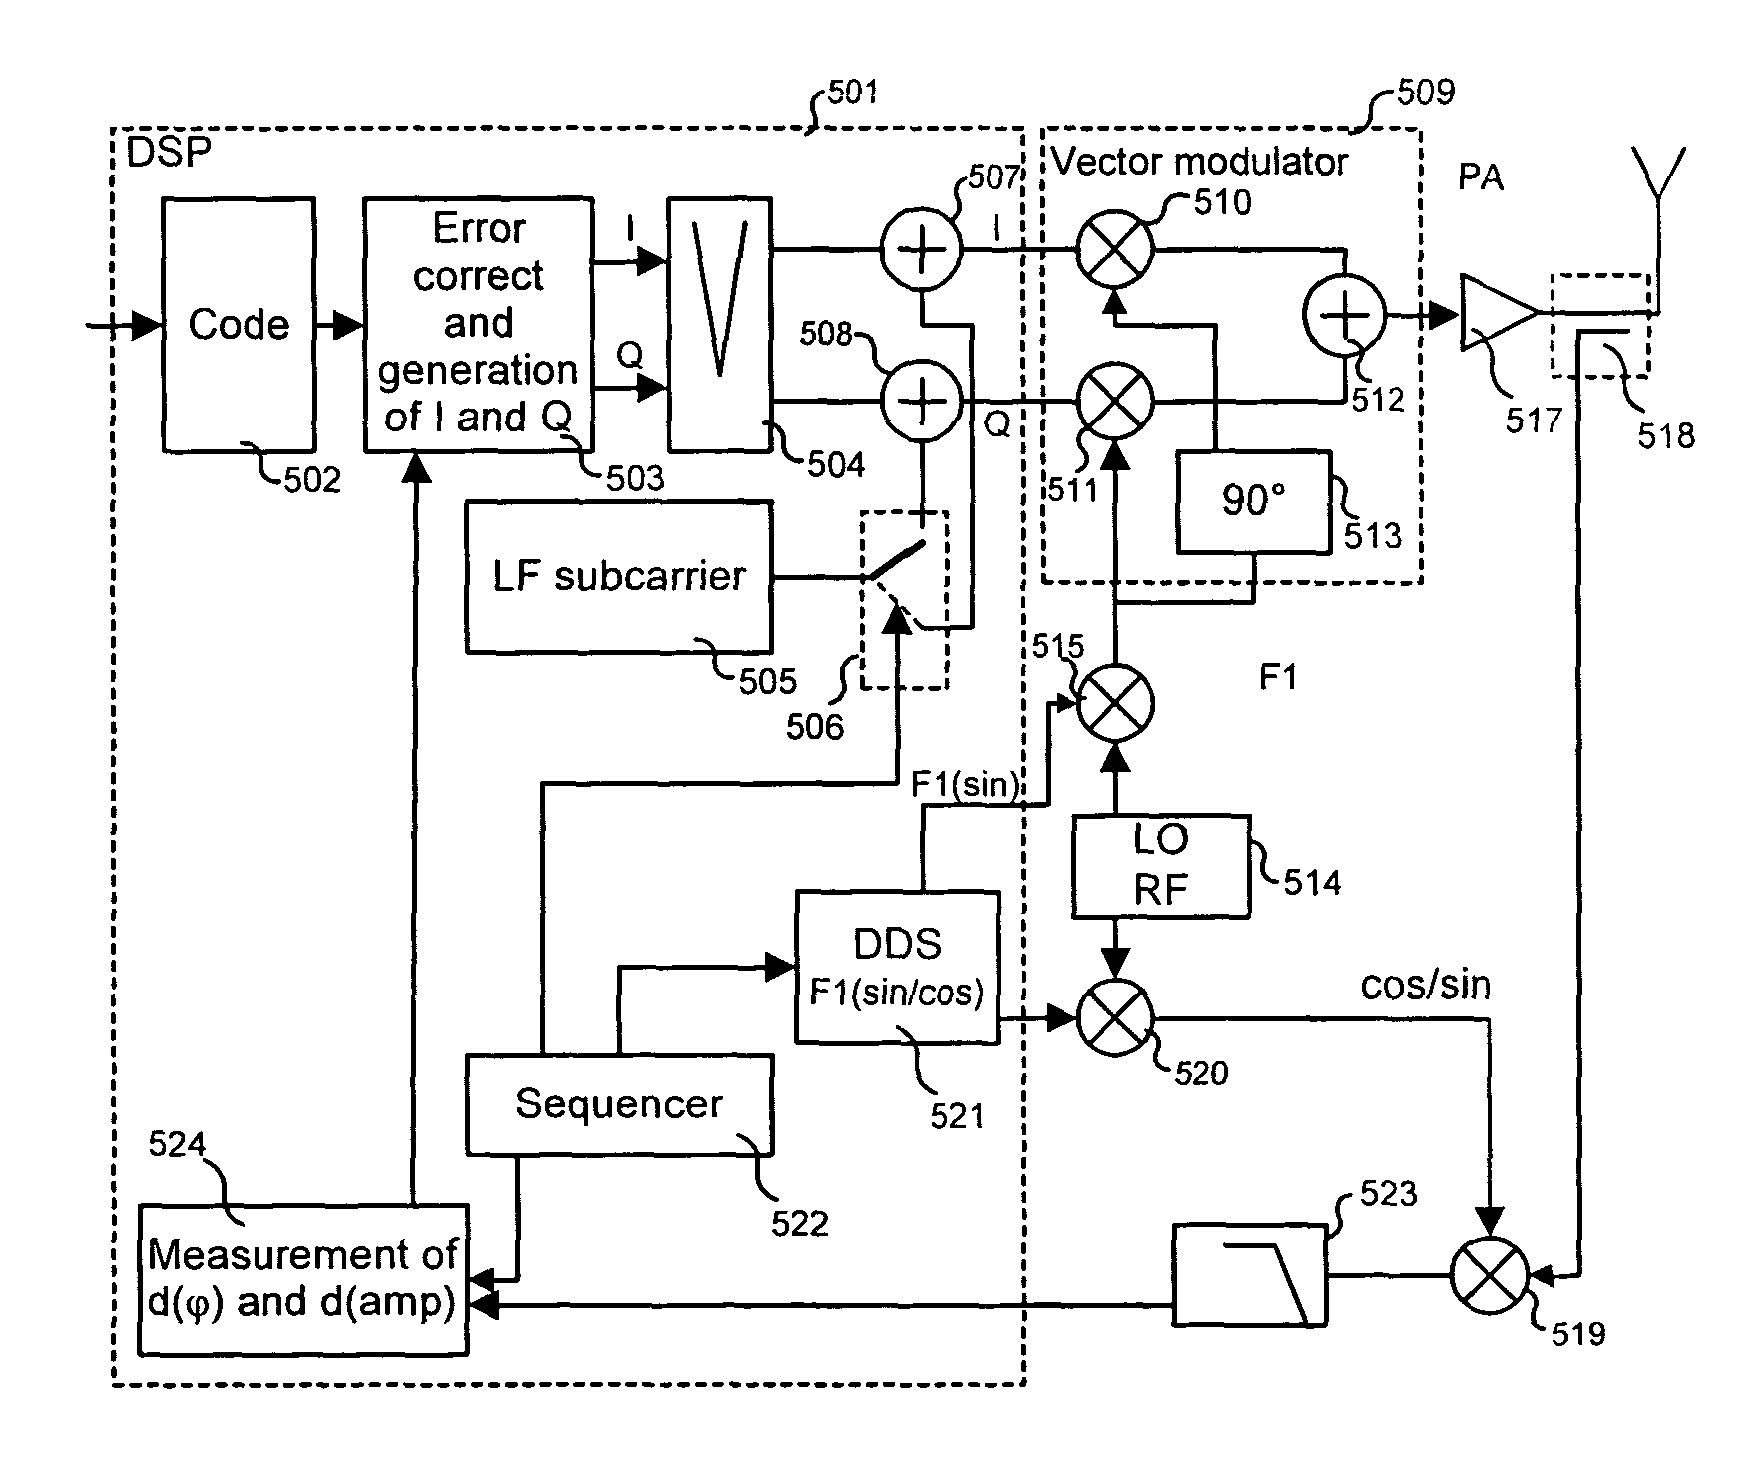 Process and device for modulating a carrier with amplitude and phase error compensation